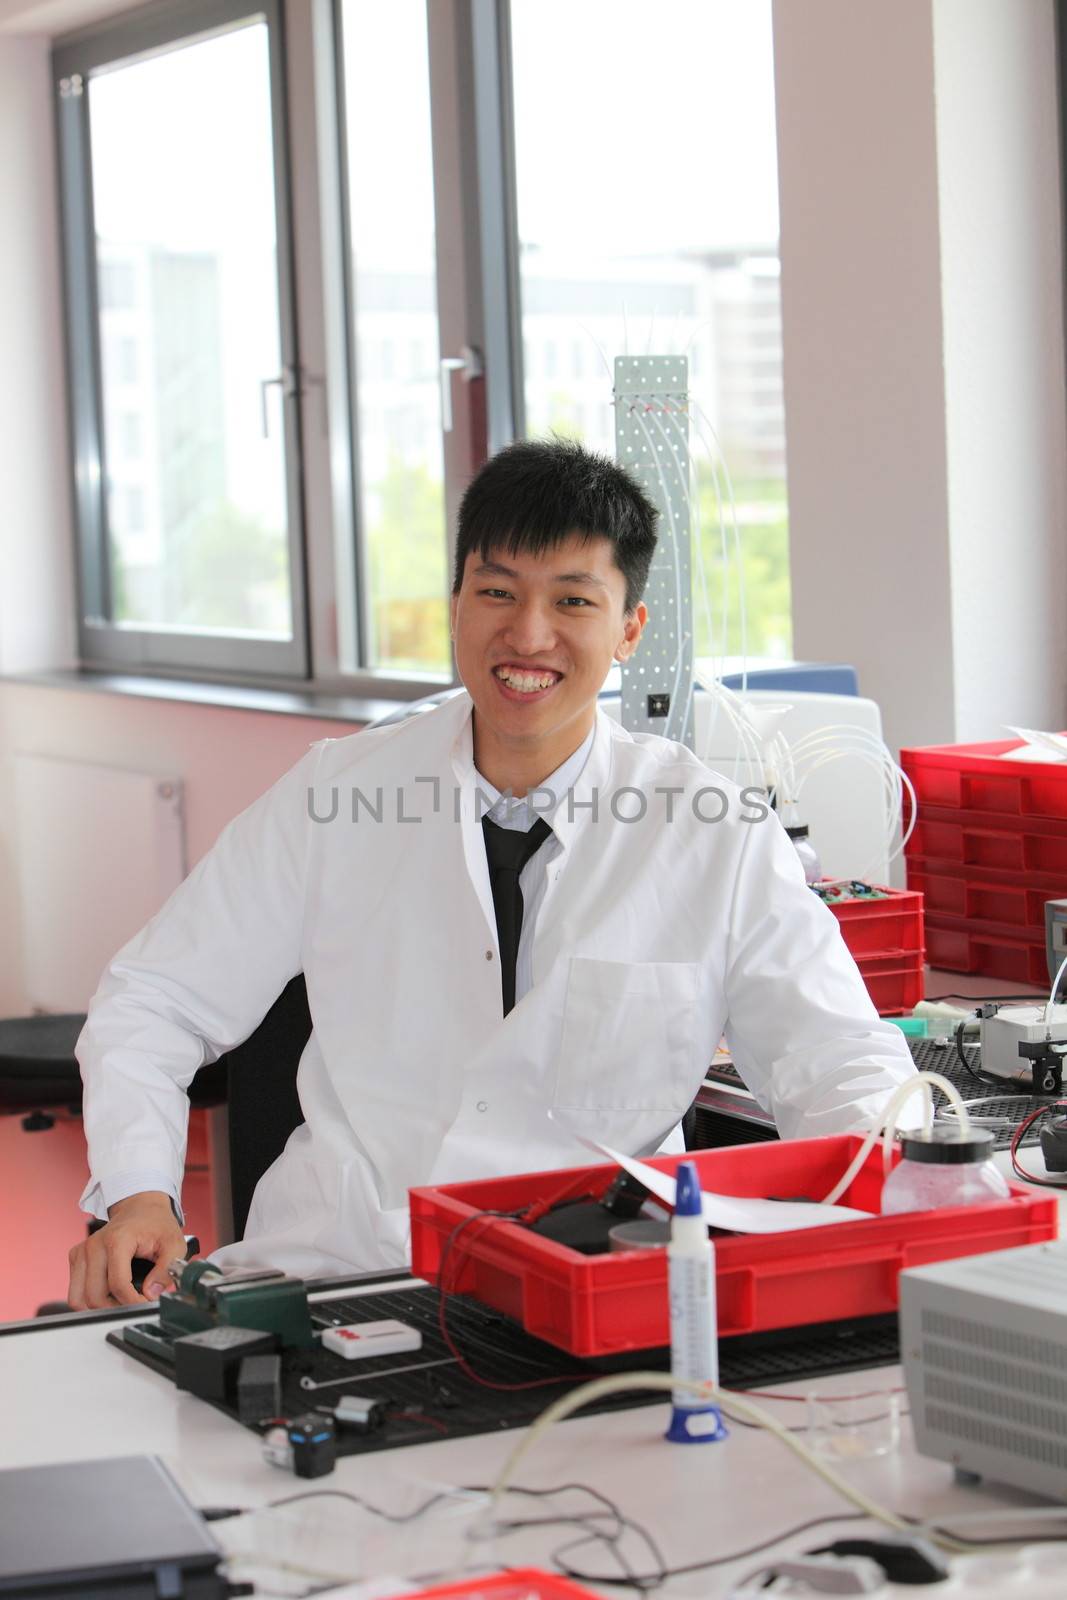 Smiling Asian man working in a laboratory sitting at his desk in a white lab coat with copyspace